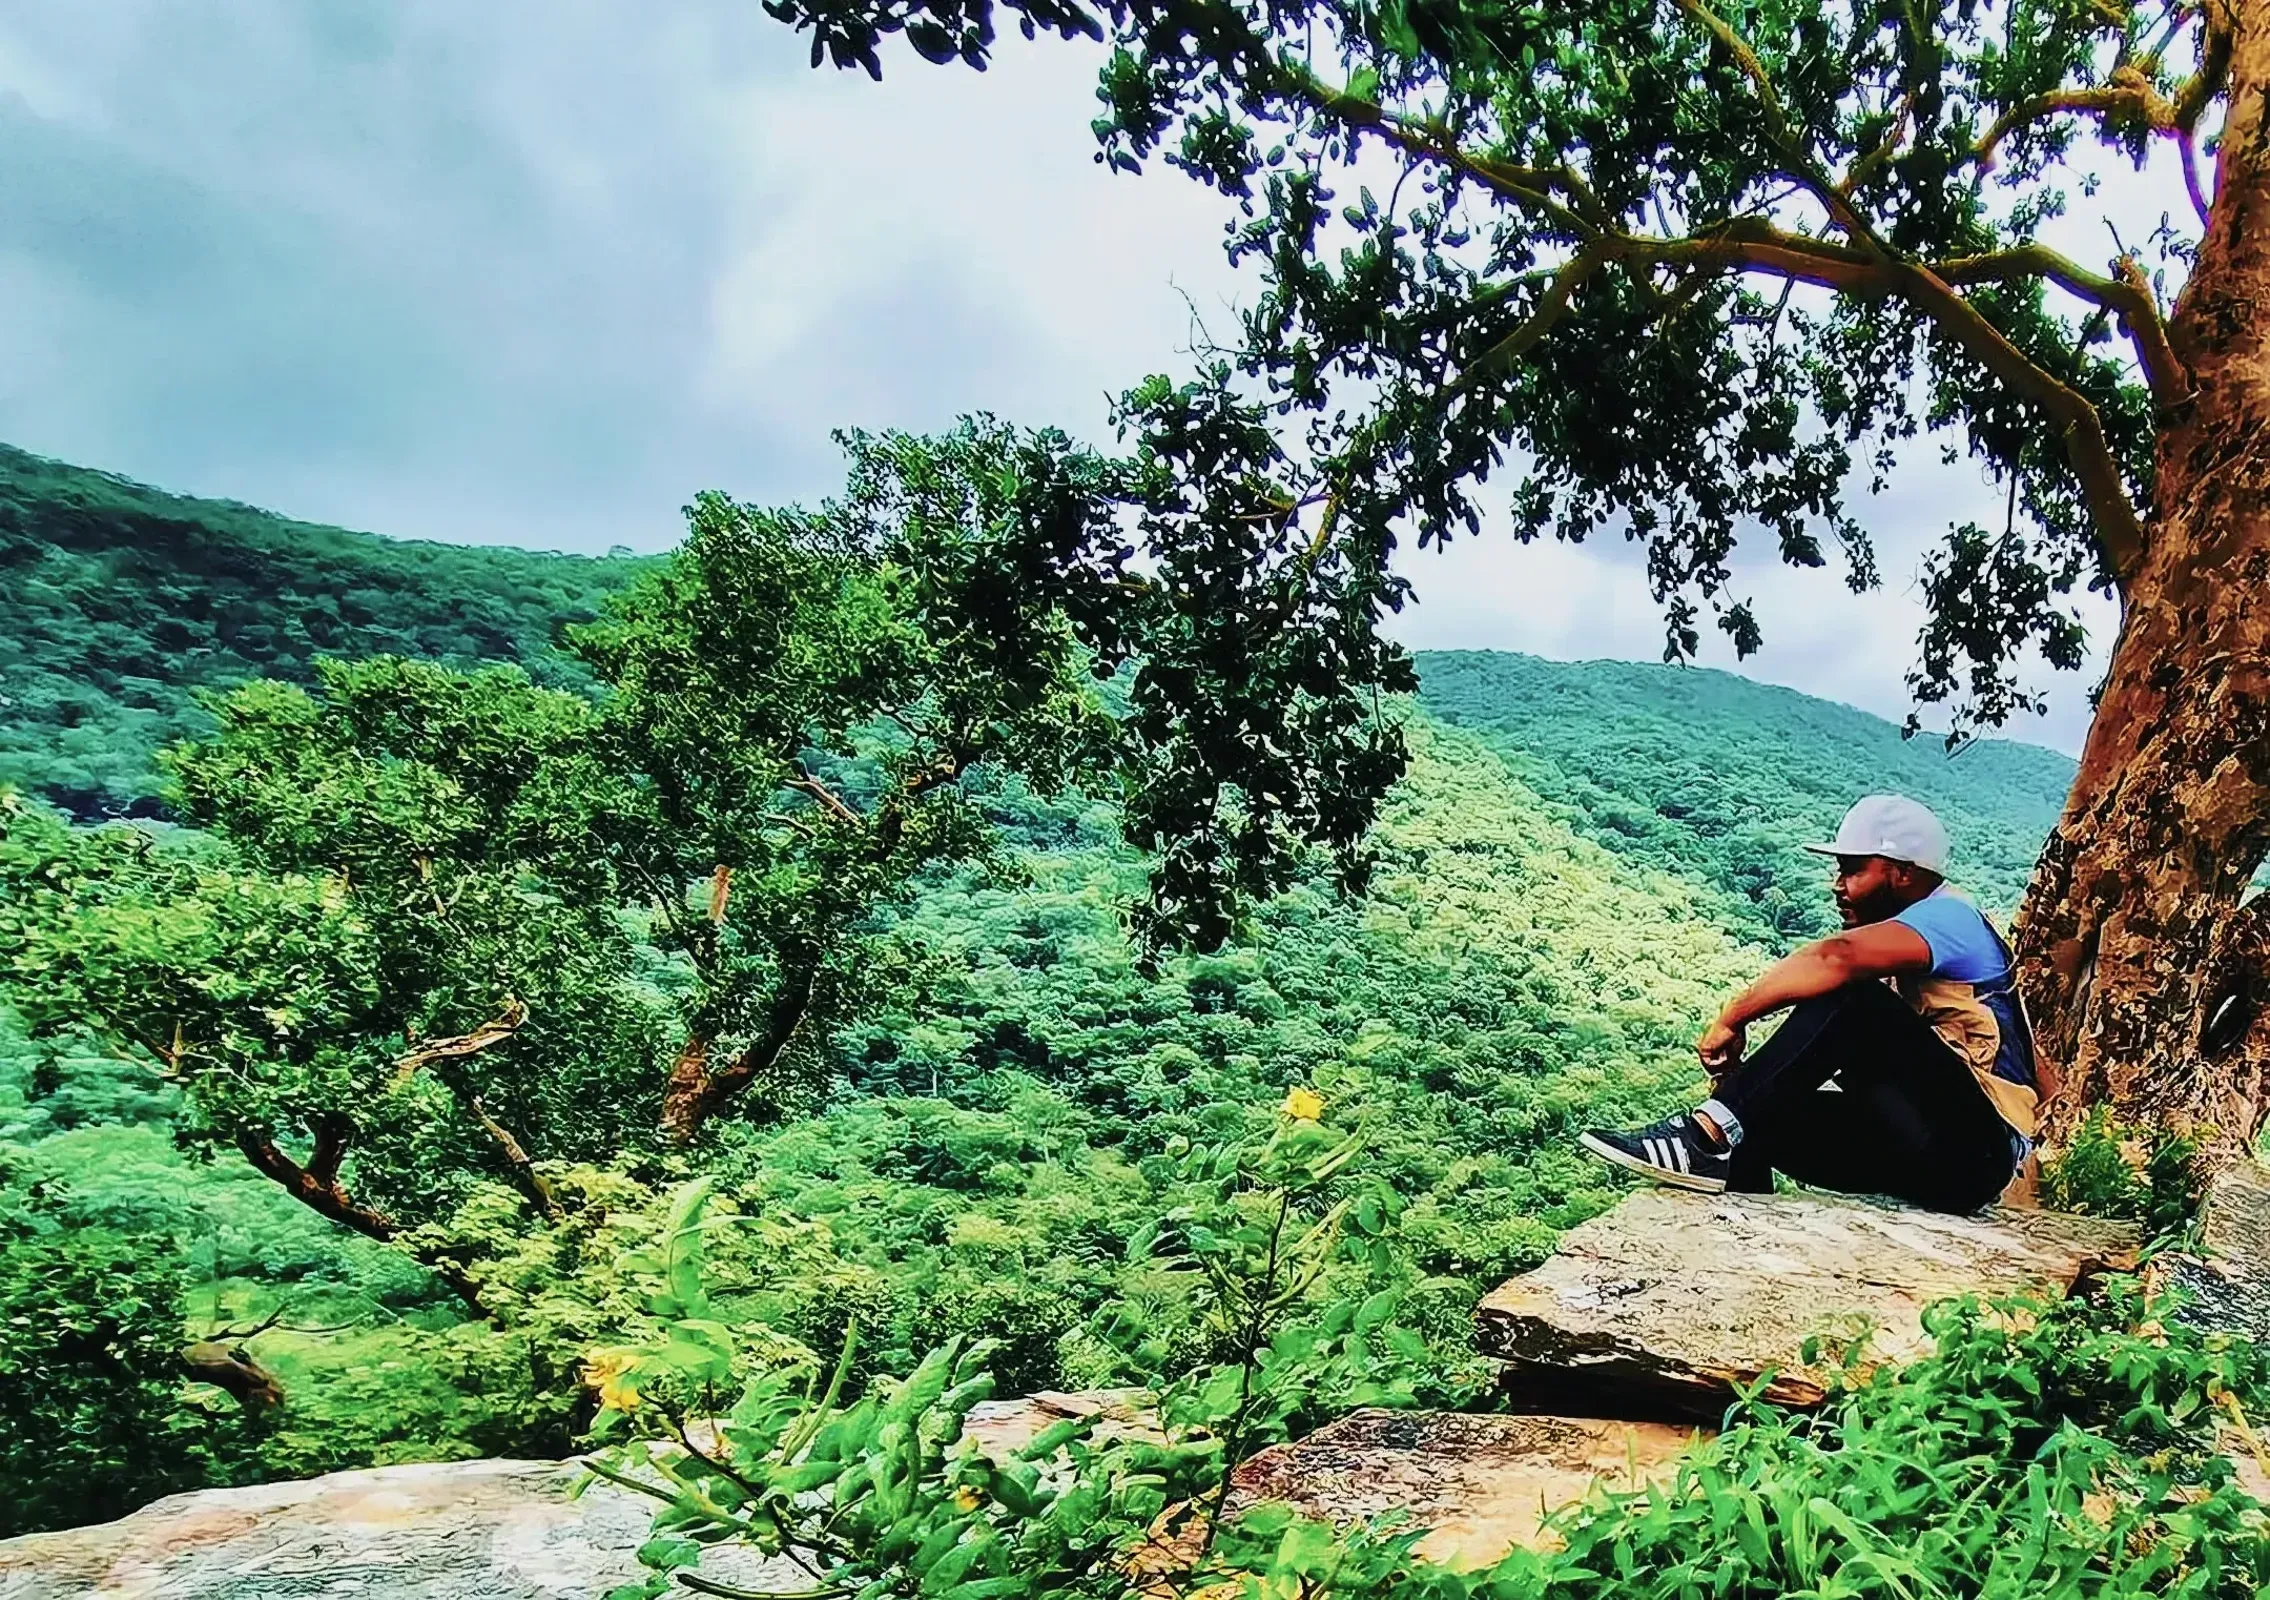 Man in hiking gear sitting on a rock in a lush forest.